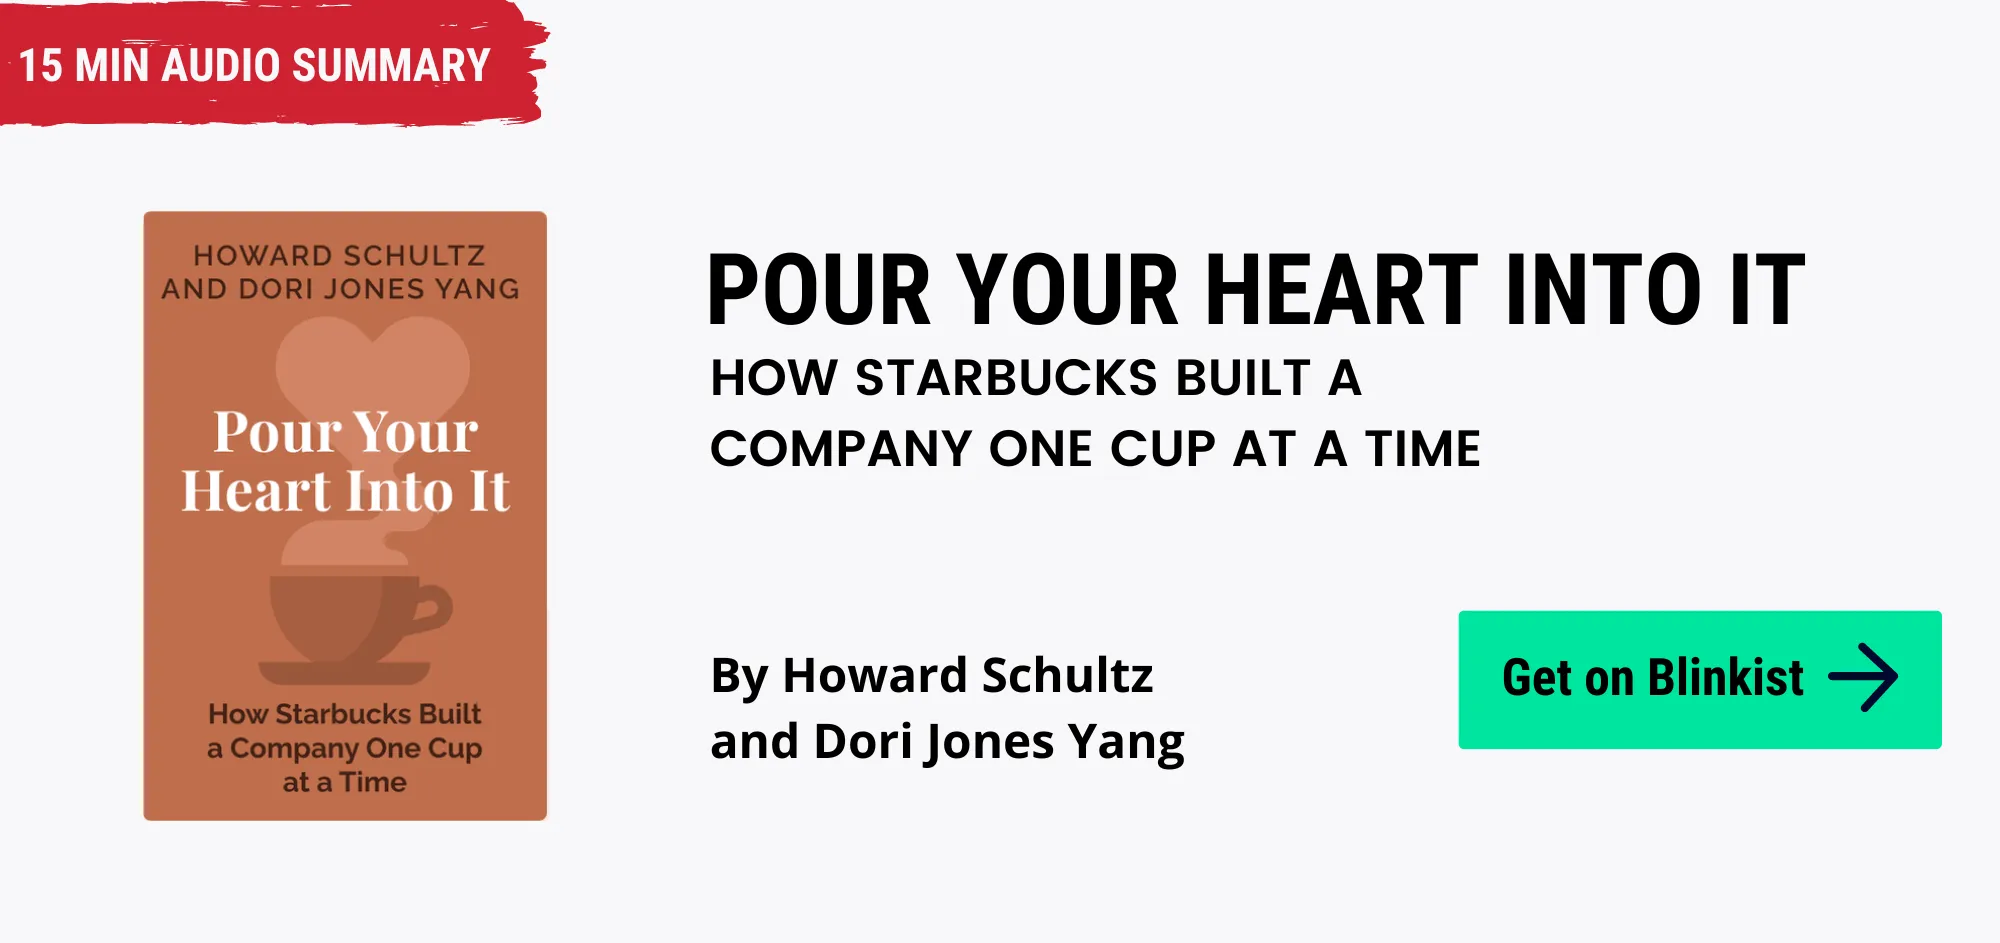 HOW Starbucks built a company one cup at a time